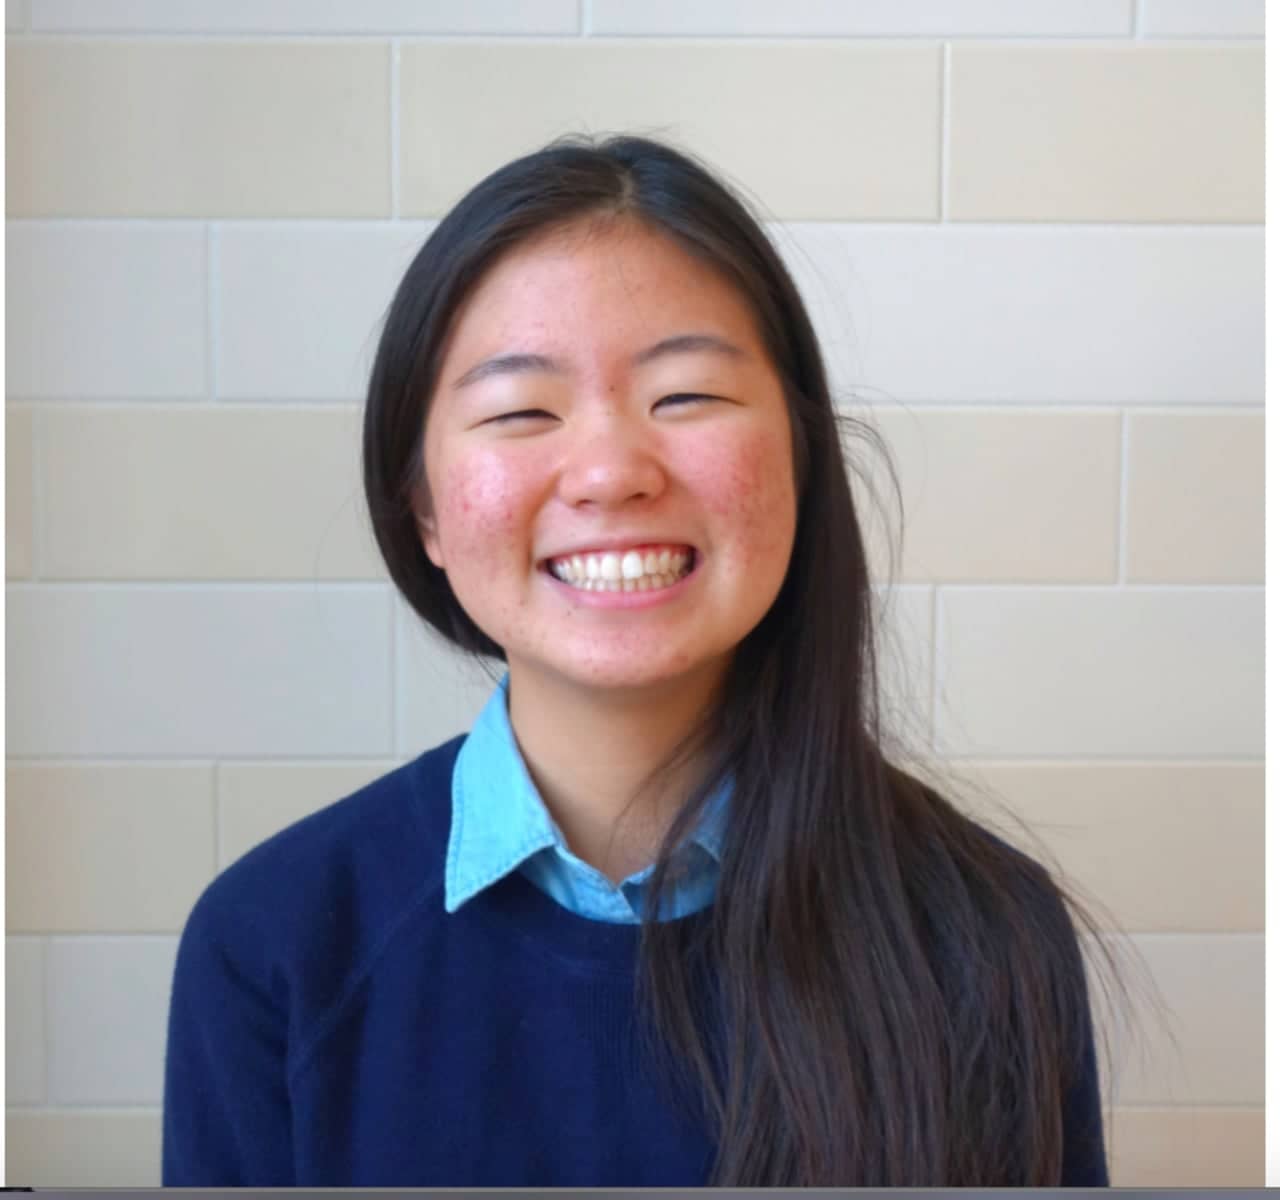 Soon Il Higashino, a student at Ossining High School, is a finalist for the nation’s most prestigious science research competition, the Intel Science Talent Search (Intel STS).